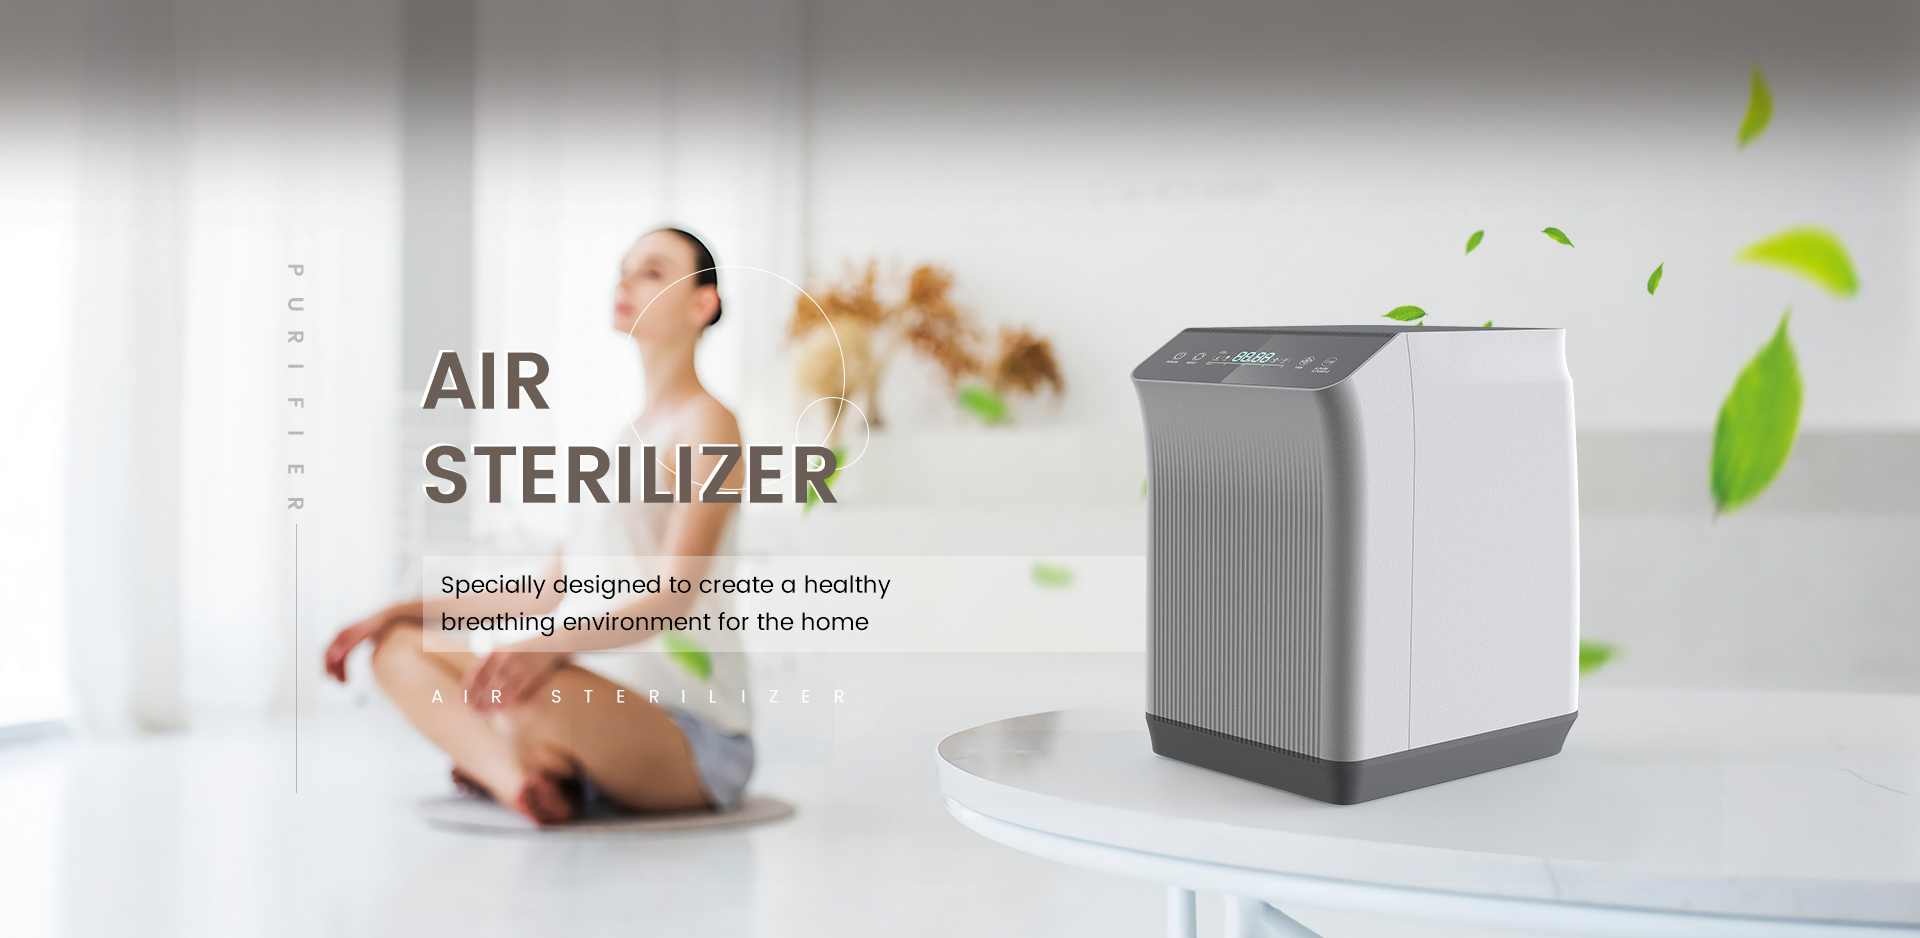 https://www.leeyoroto.com/f-air-purifier-specially-designed-to-create-a-haalthy-breathing-environment-for-the-home-product/